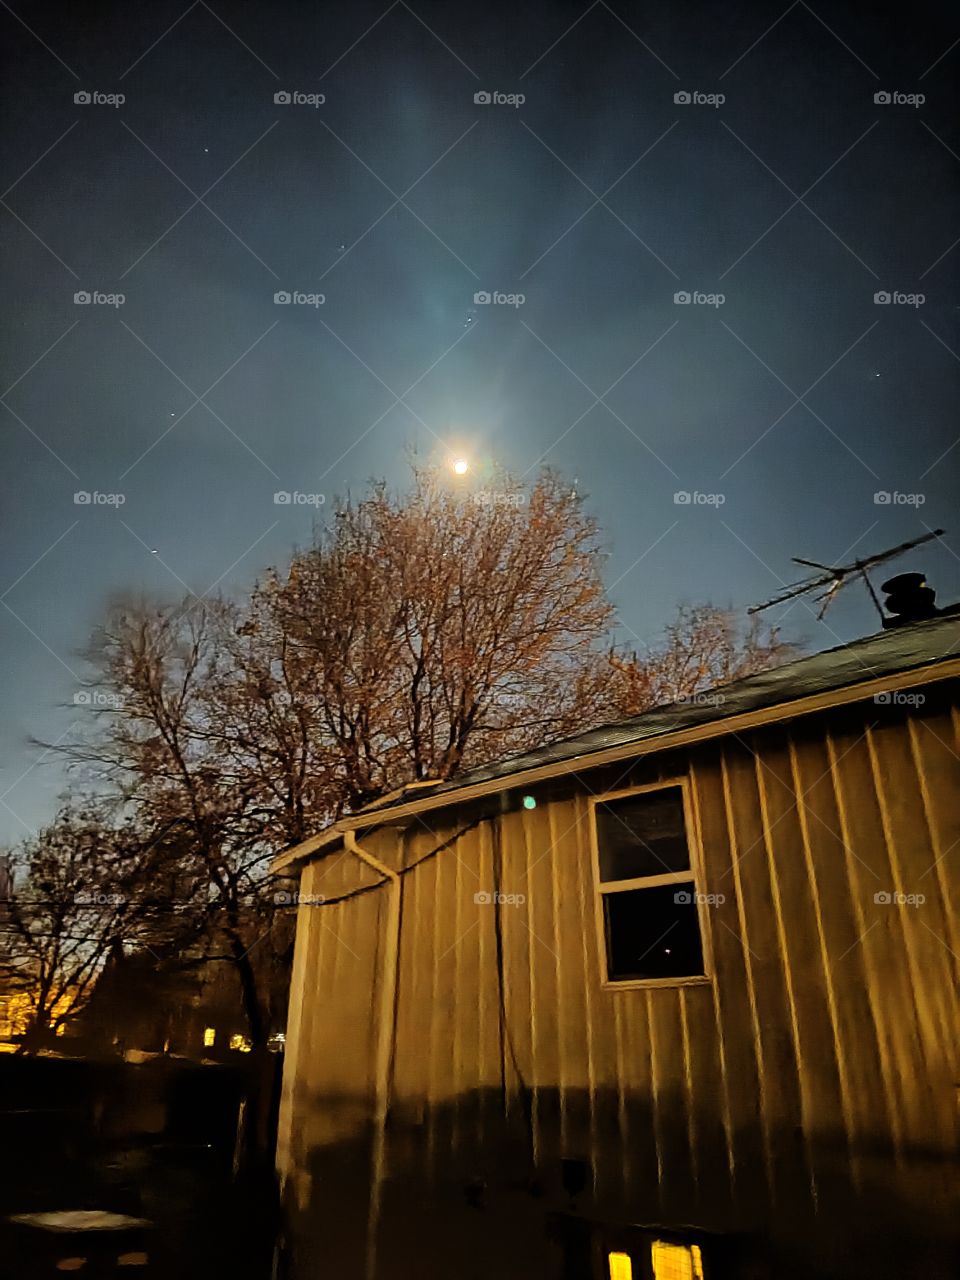 Normal camera in capturing the Moon